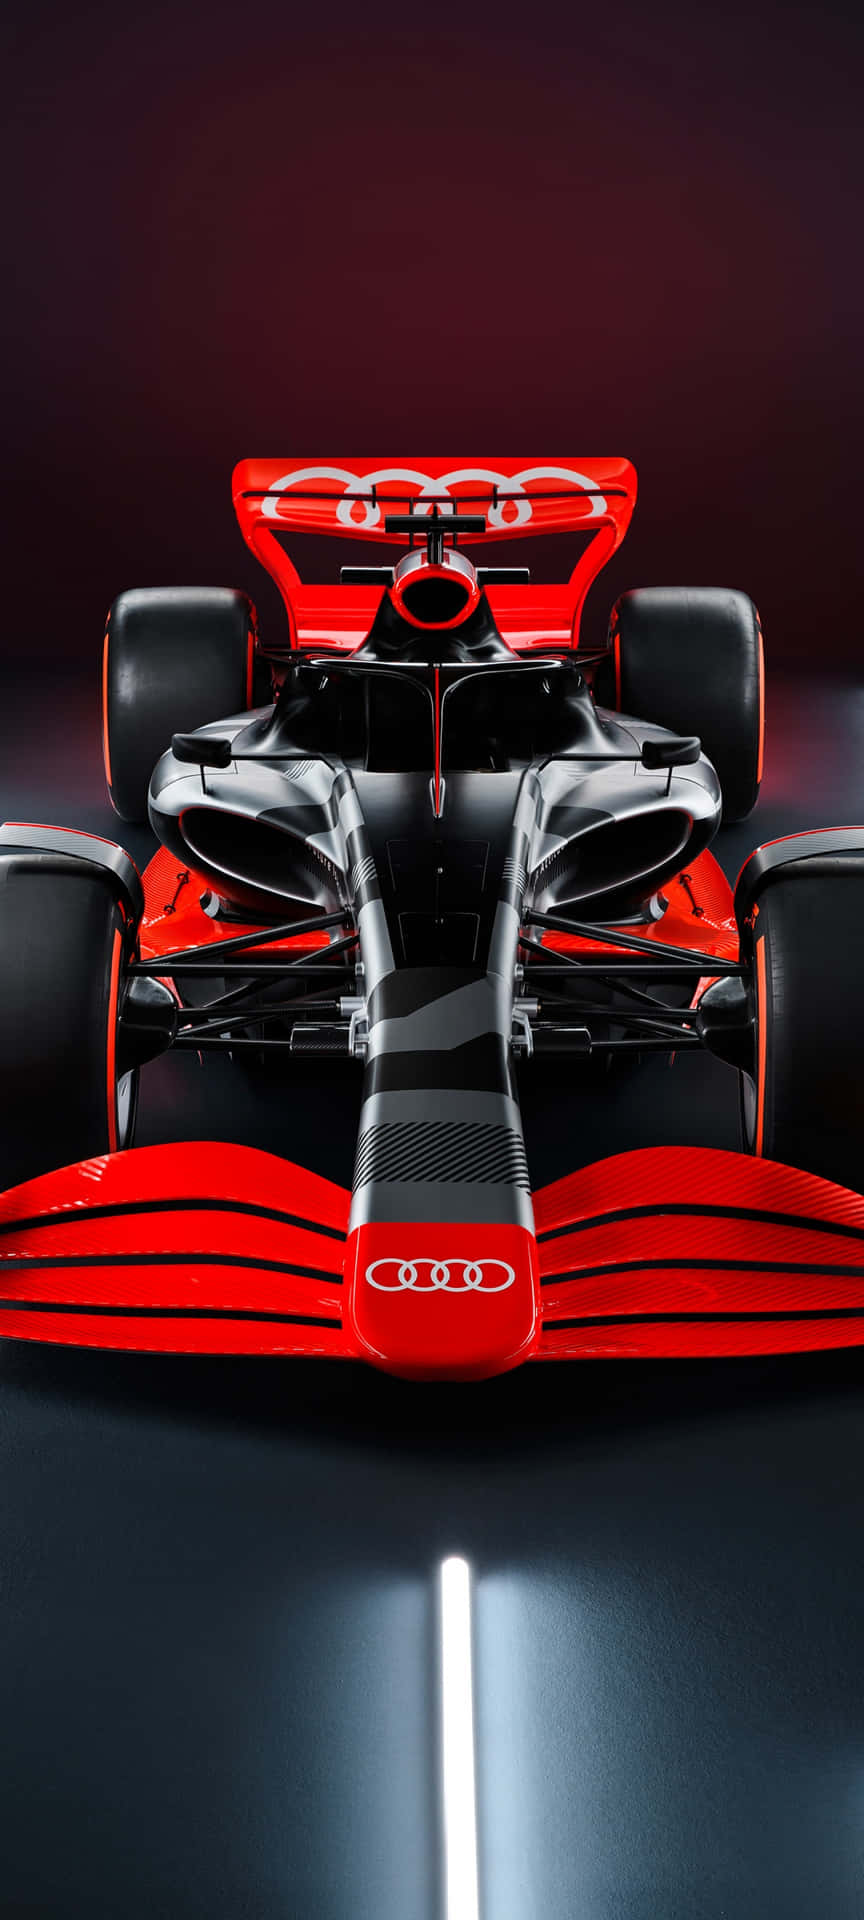 Race ready - Ready for an epic day of Formula One racing Wallpaper